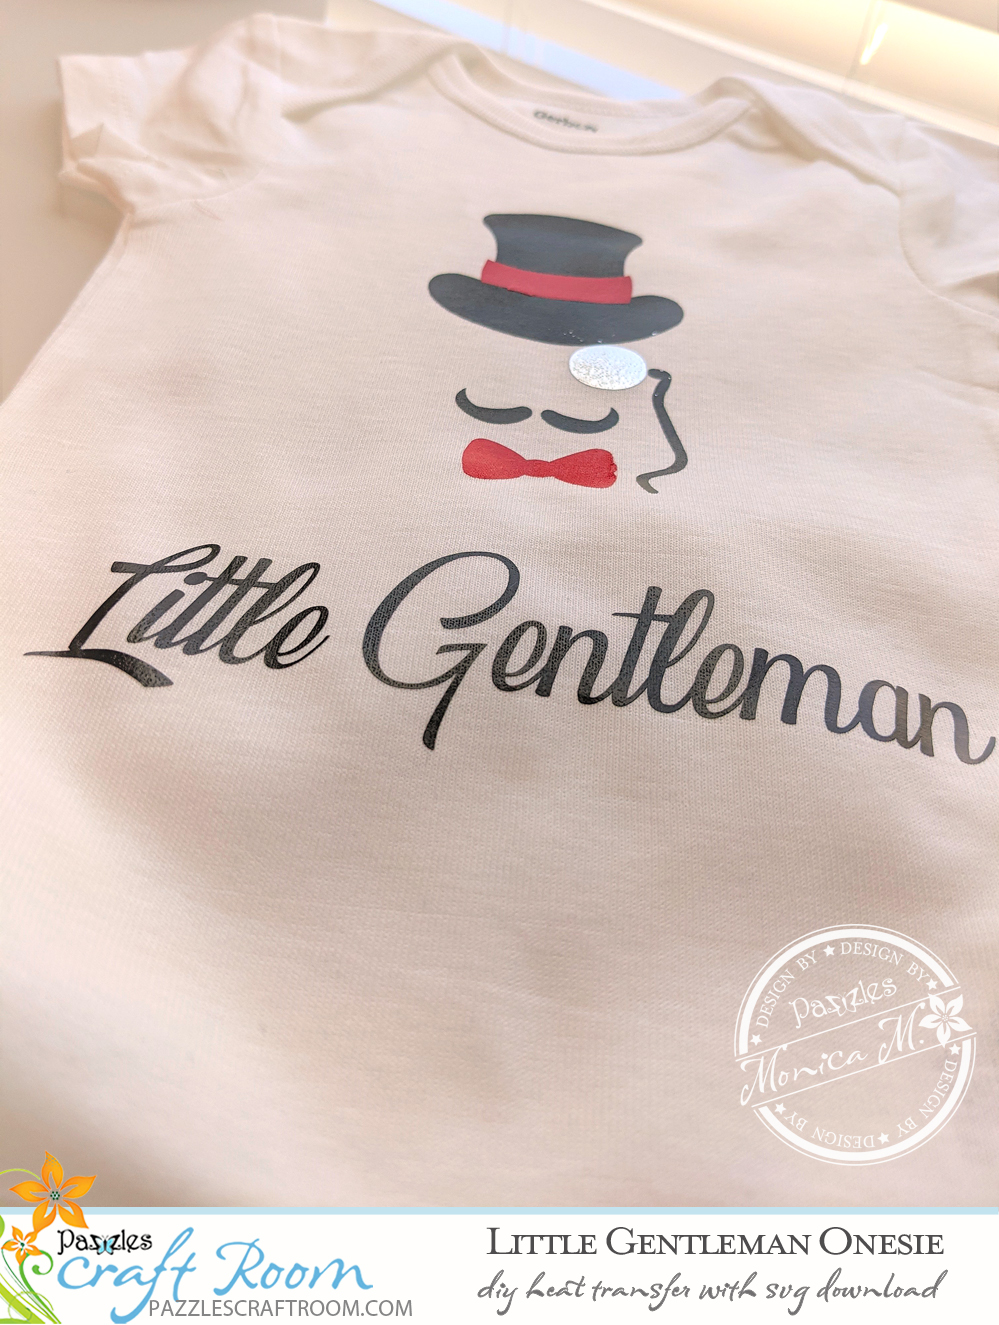 Pazzles DIY Little Gentleman Onesie with instant SVG download.  Instant SVG download compatible with all major electronic cutters including Pazzles Inspiration, Cricut, and Silhouette Cameo. Design by Monica Martinez.